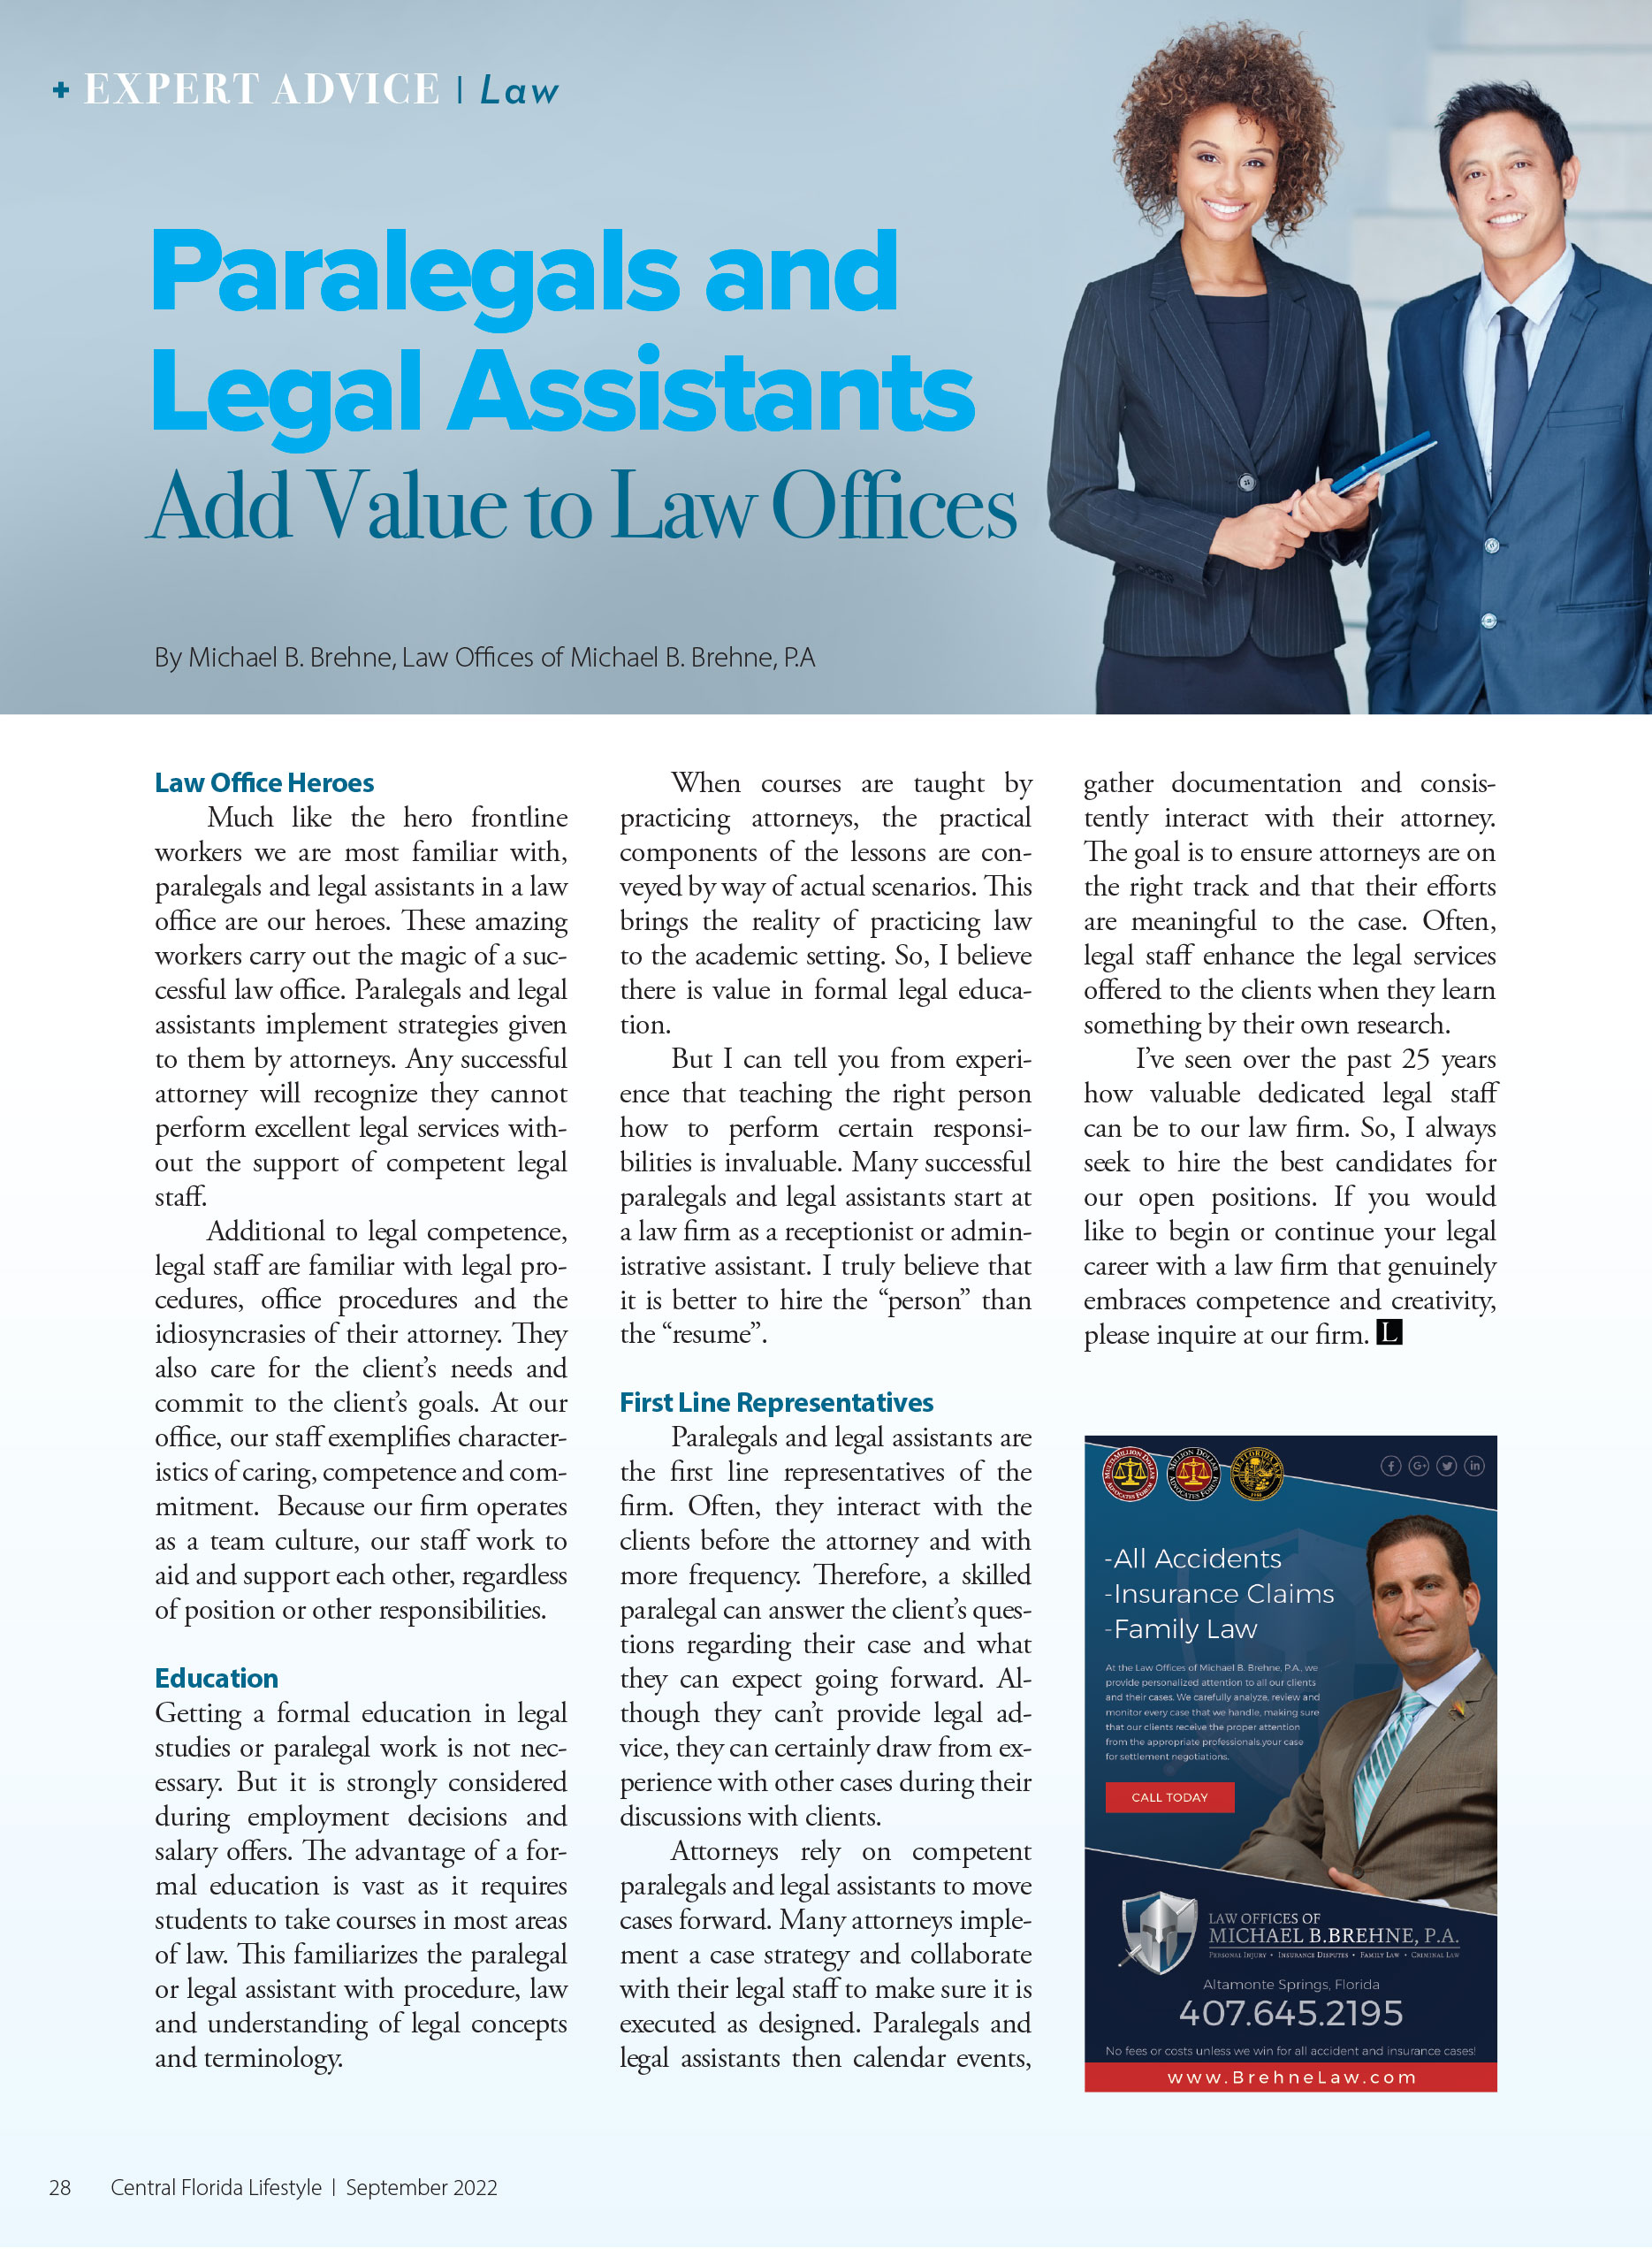 Paralegals & Legal Assistants Add Value To Law Offices